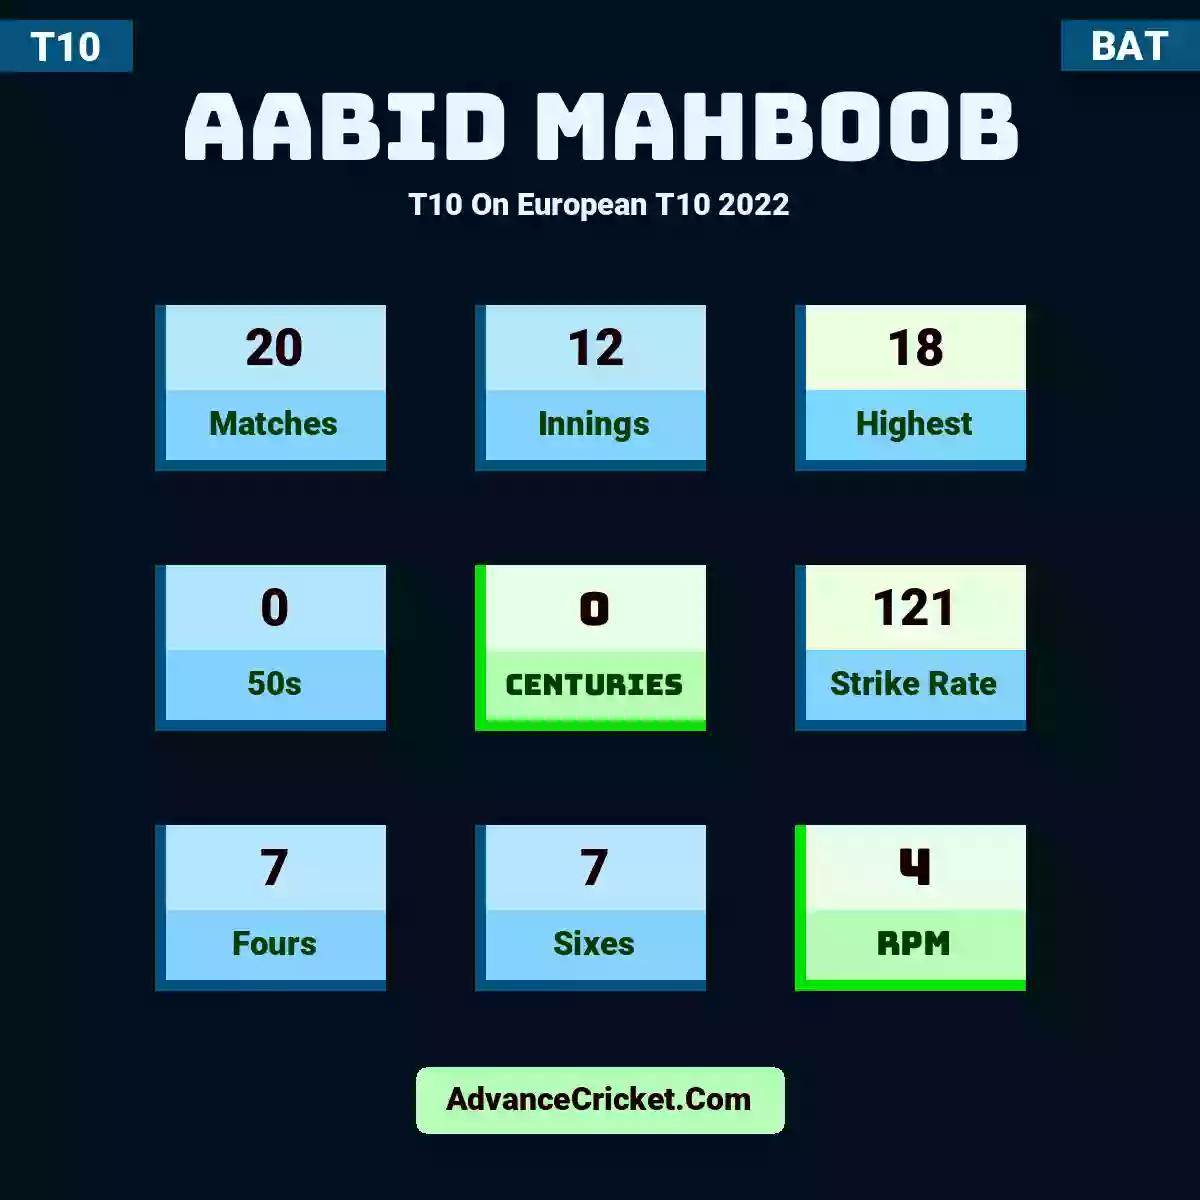 Aabid Mahboob T10  On European T10 2022, Aabid Mahboob played 20 matches, scored 18 runs as highest, 0 half-centuries, and 0 centuries, with a strike rate of 121. A.Mahboob hit 7 fours and 7 sixes, with an RPM of 4.